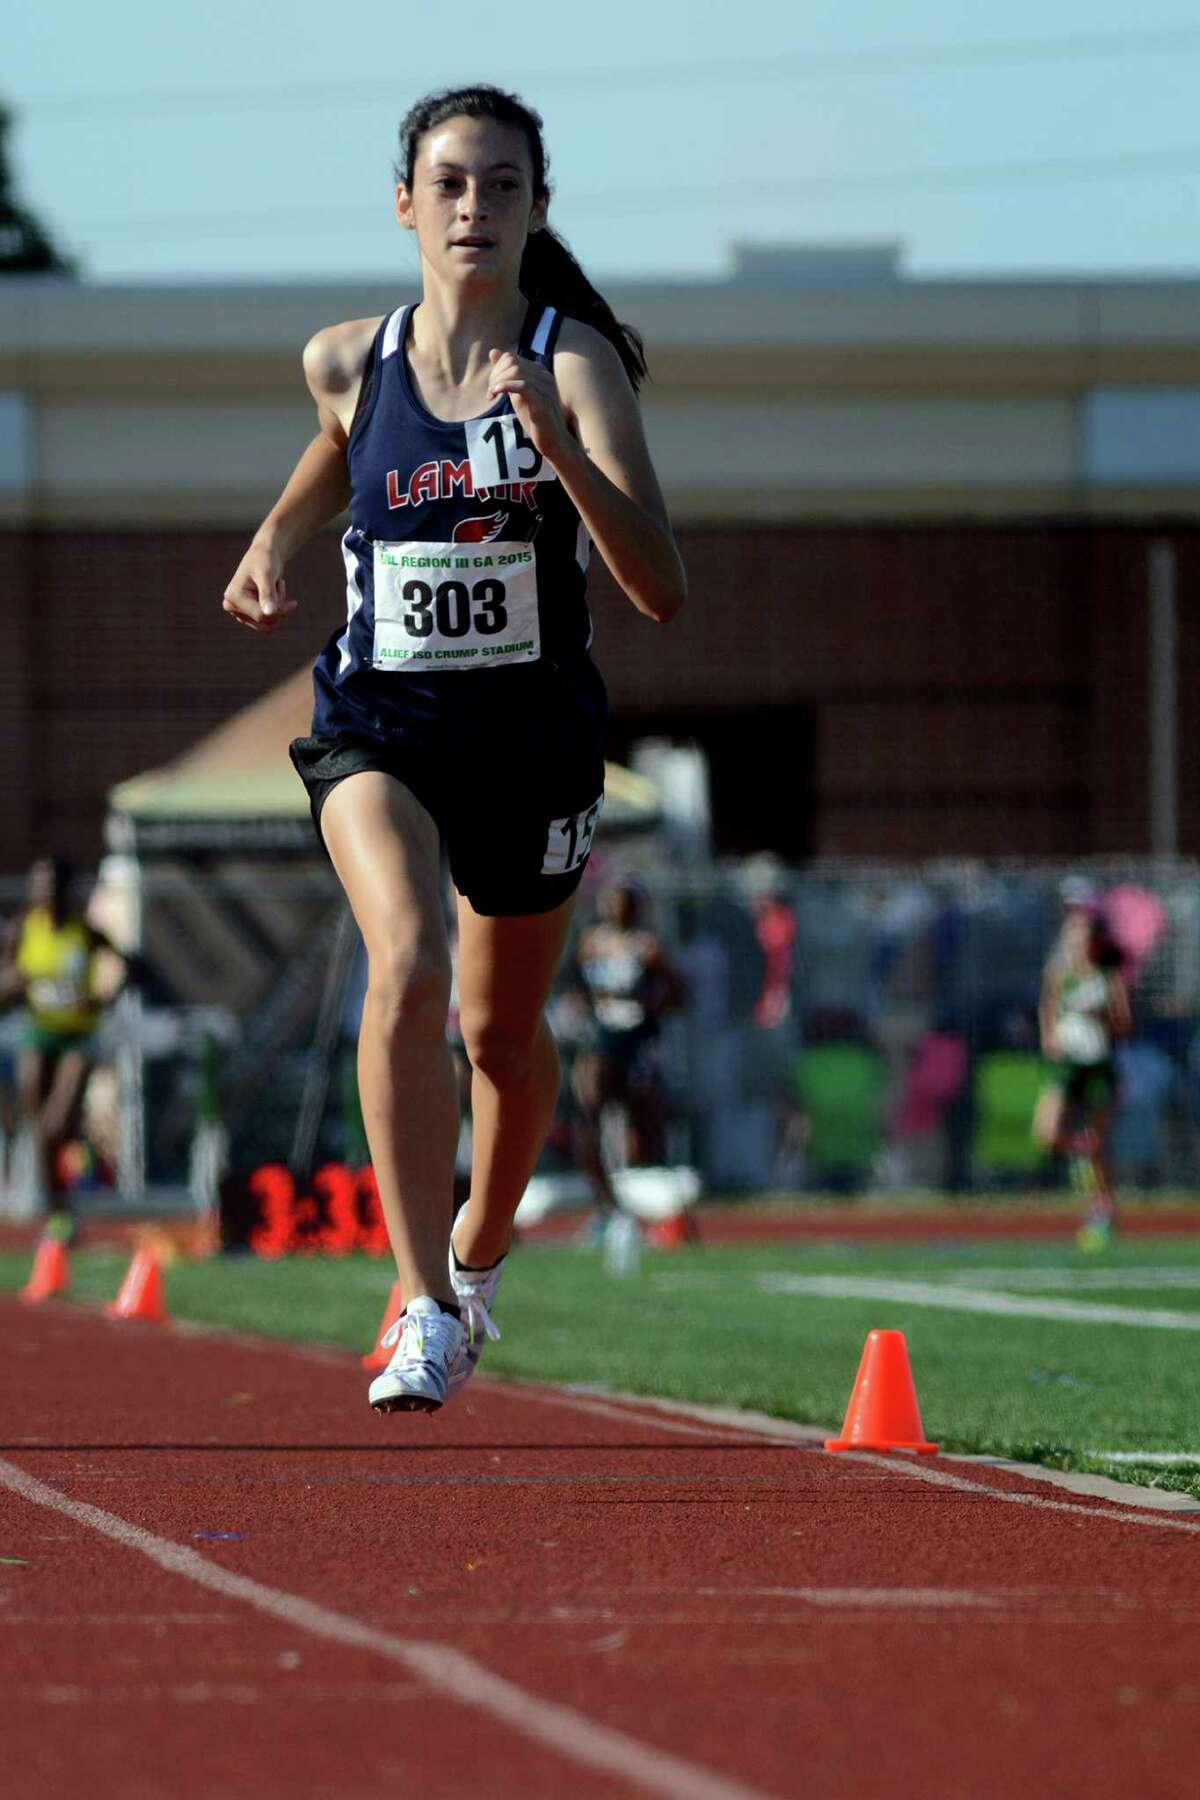 Houston Lamar sophomore Julia Heymach sprints to the finish line during the Girls 1600 Meter Run during the running finals of the 2015 Region III-6A Track & Field Championship at Crump Stadium in Alief on Saturday, May 2, 2015.